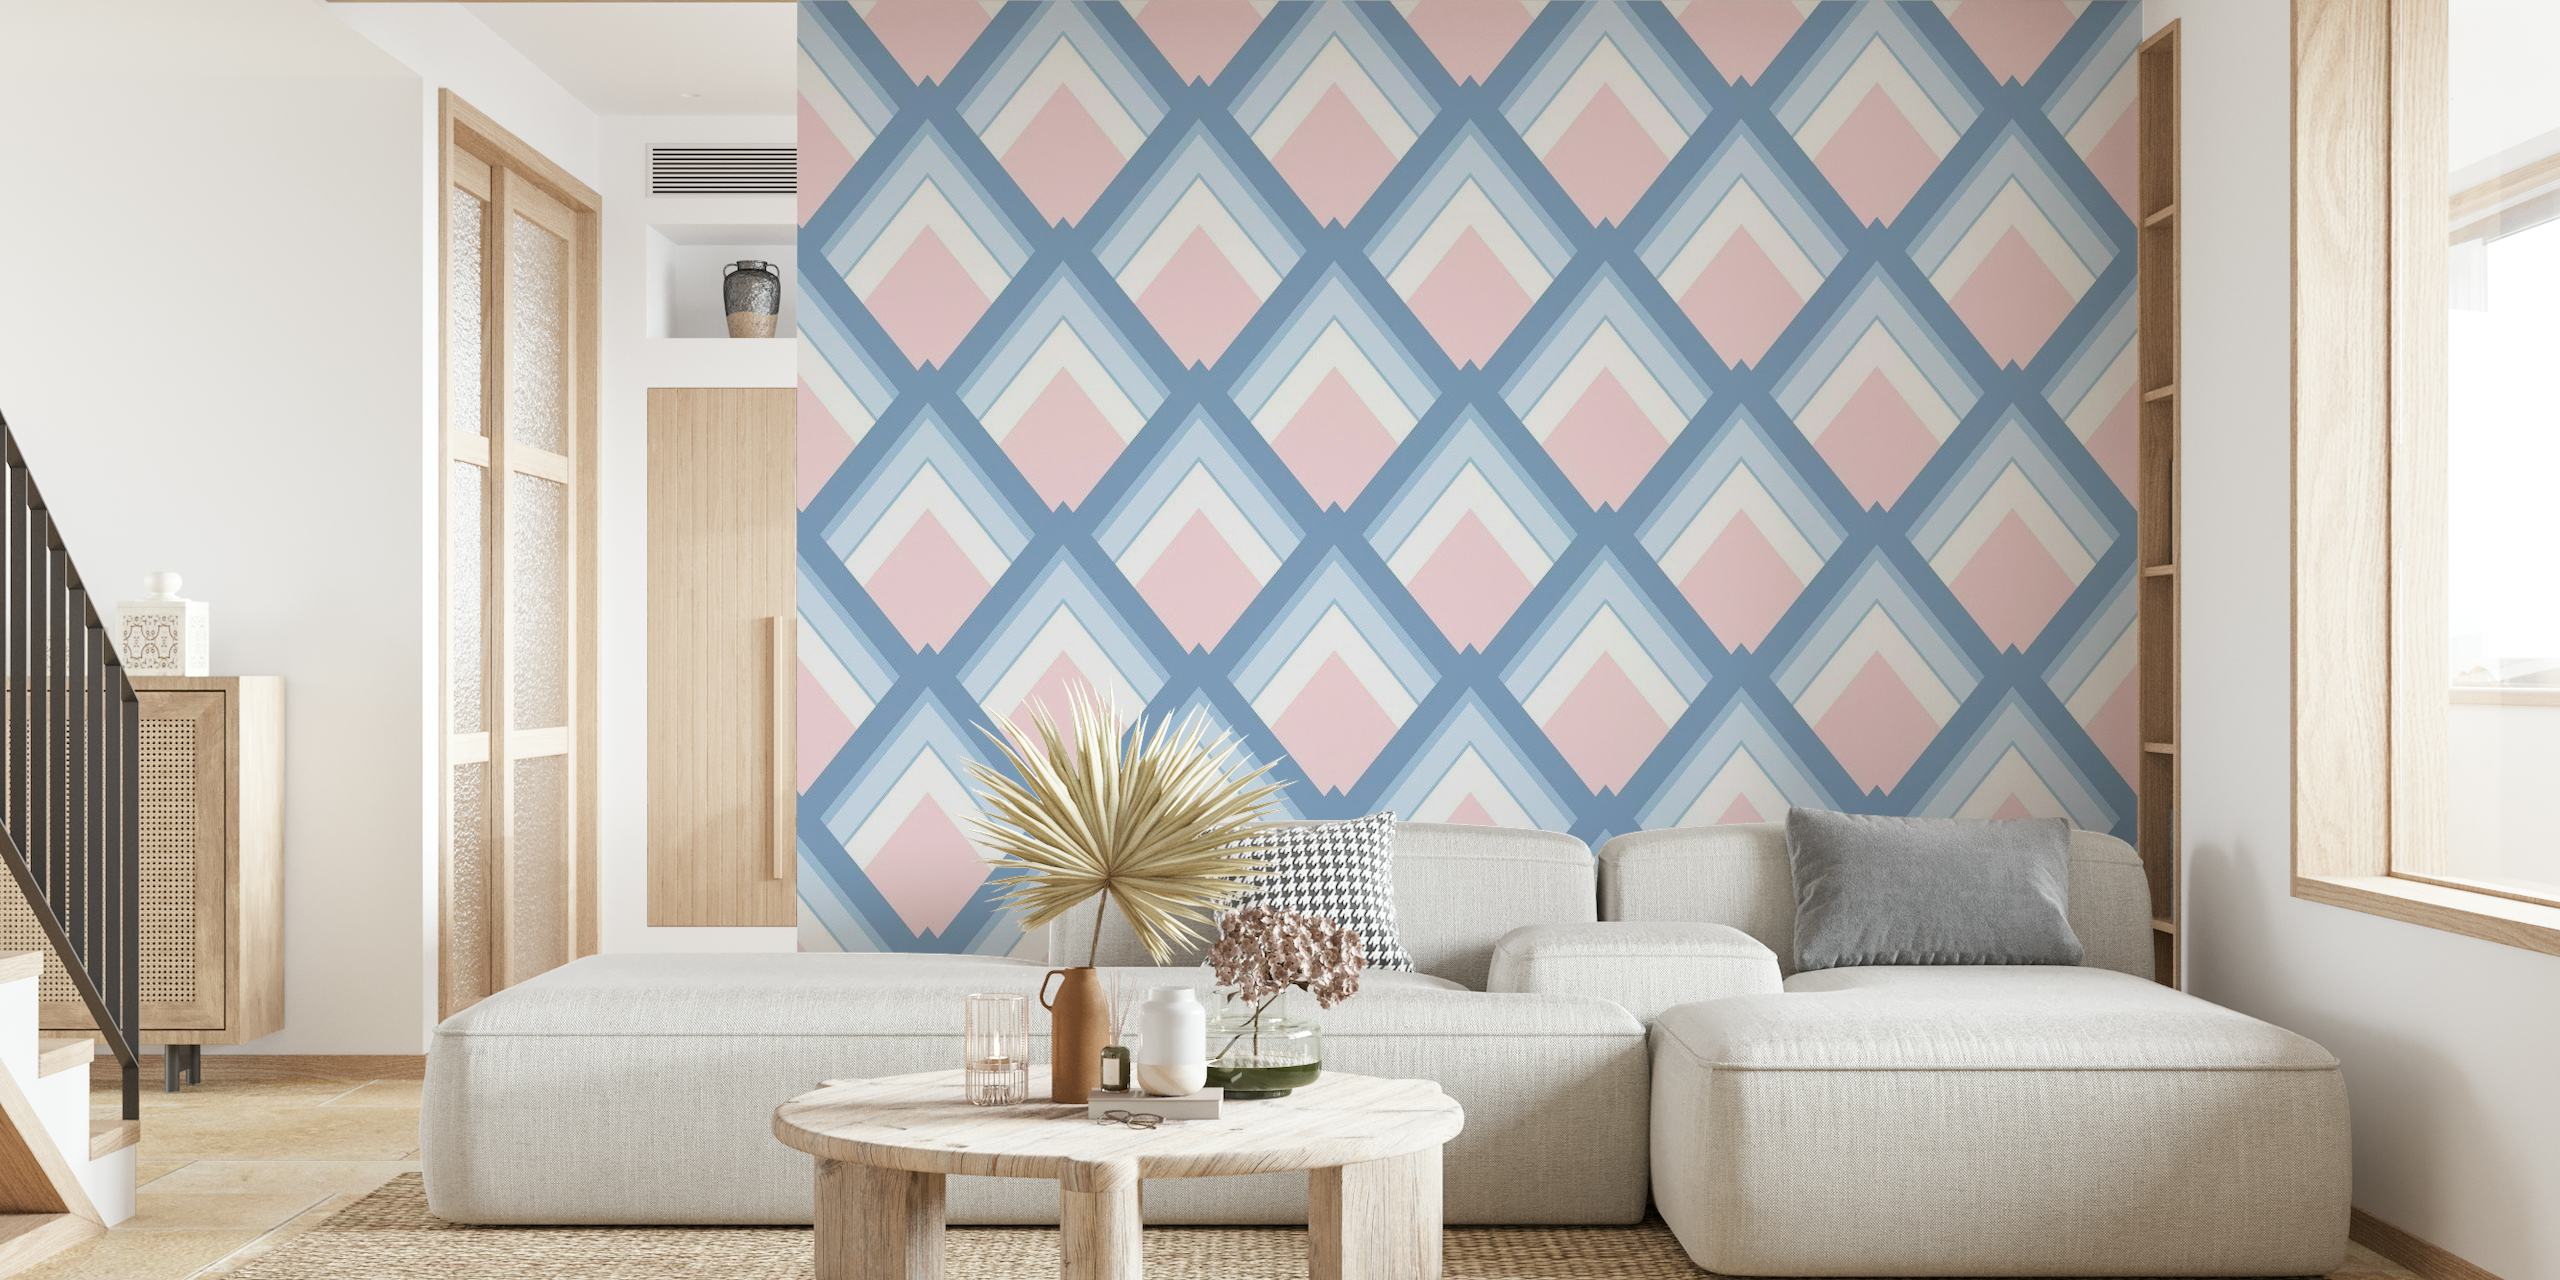 Abstract Geometrical 6 wall mural with pink and blue patterns